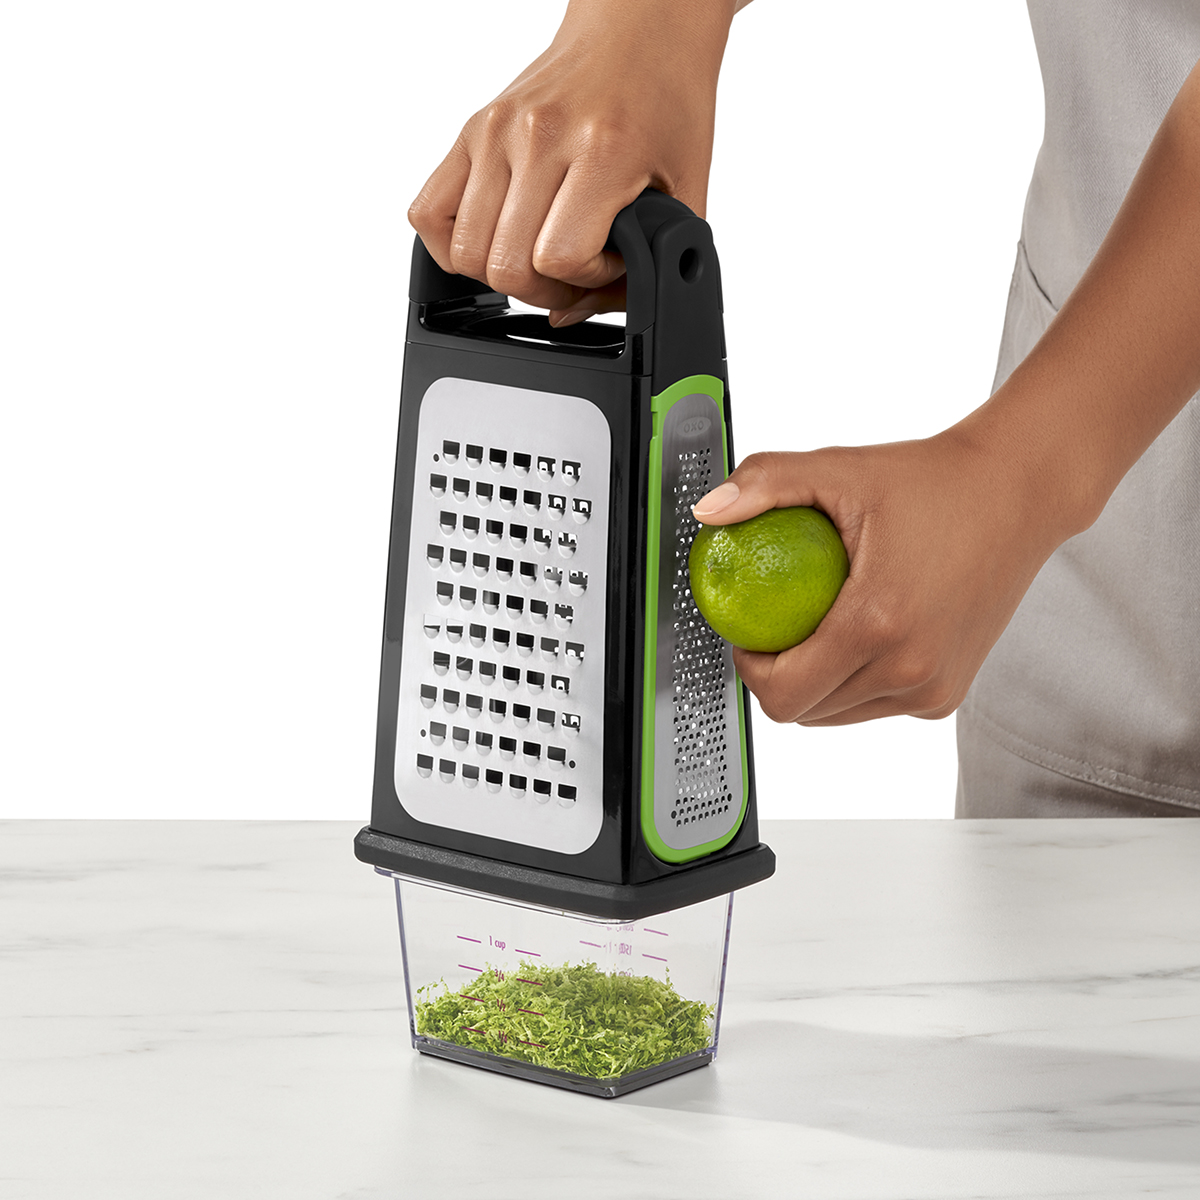 https://www.containerstore.com/catalogimages/425007/10086166-OXO-Box-Grater-VEN9.jpg